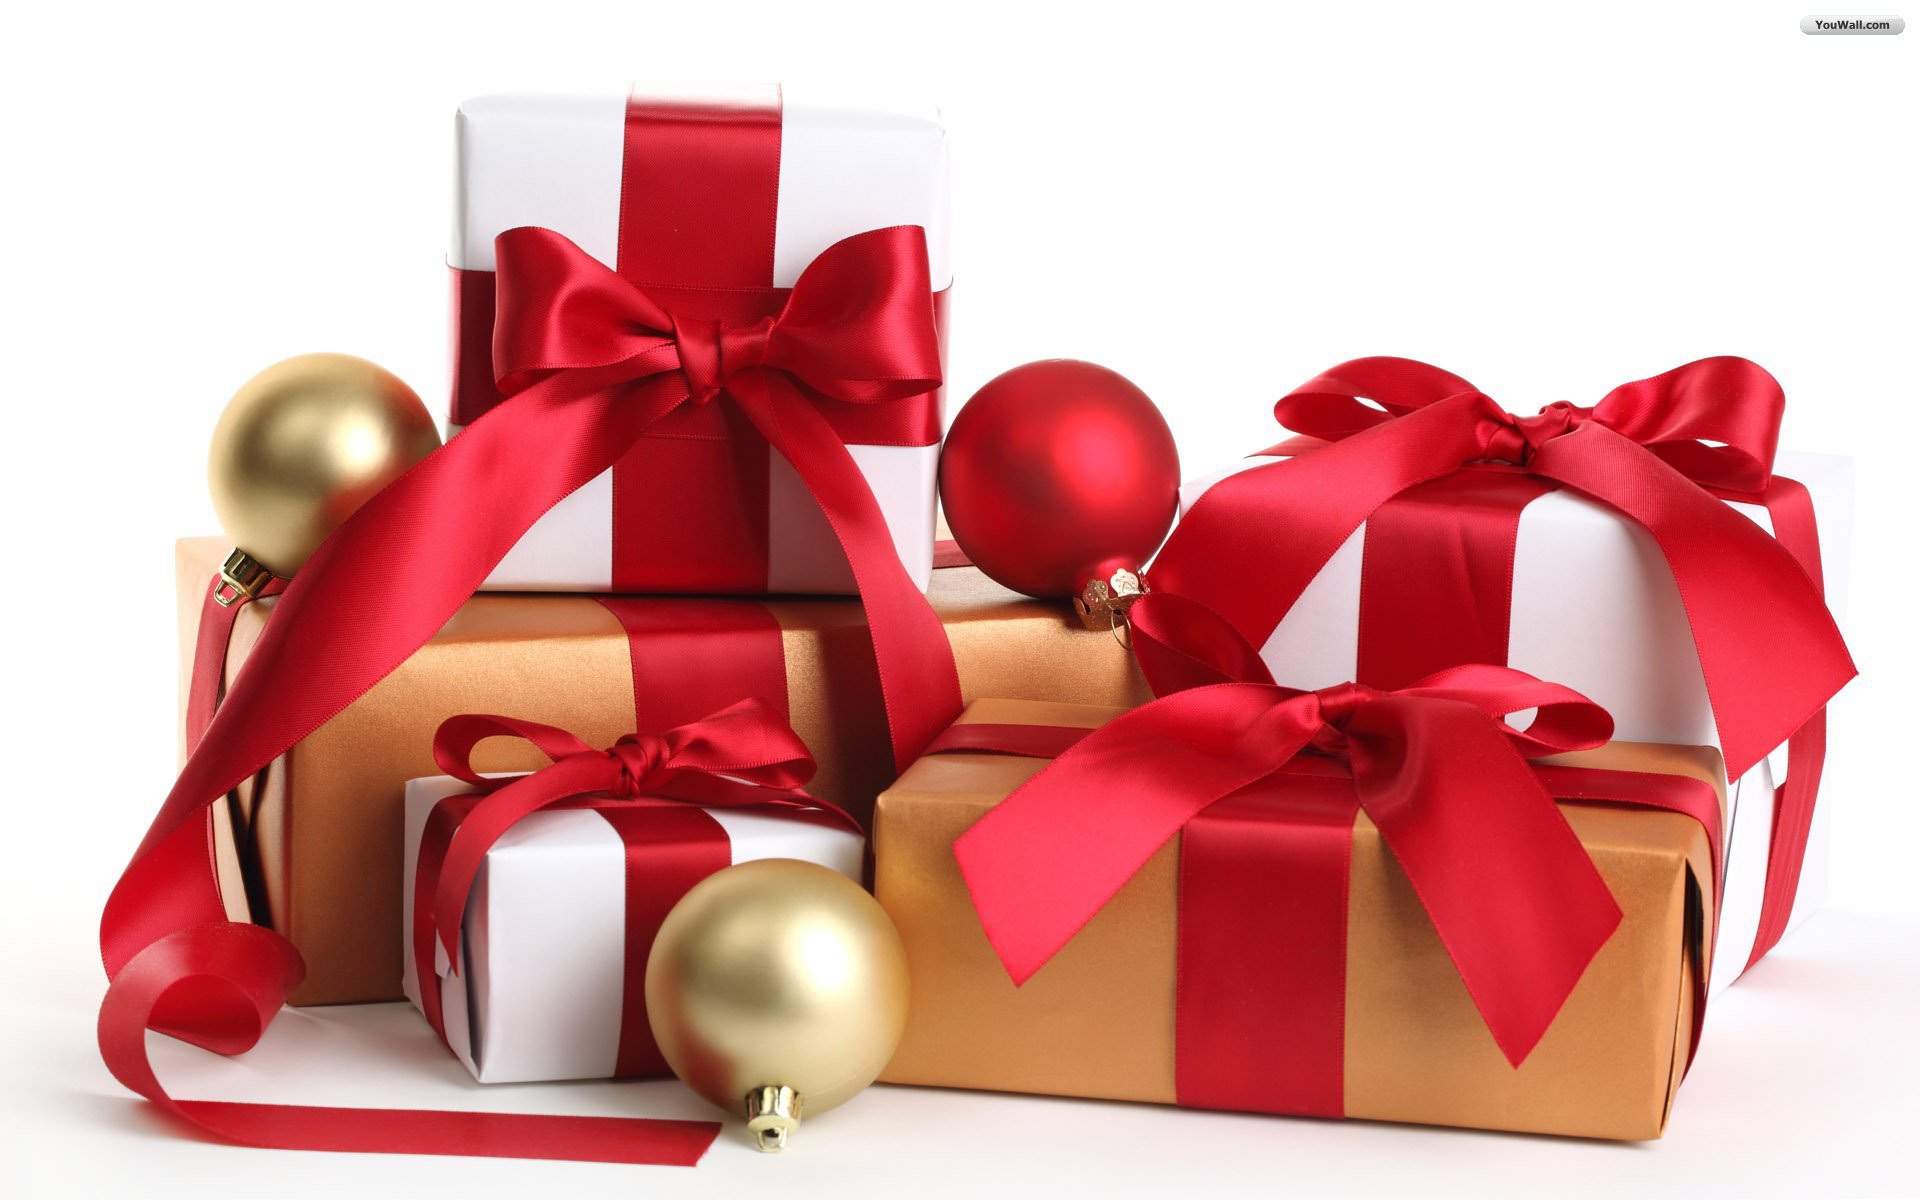 Bad At Wrapping? Don't Worry This Christmas With These Amazing Tips